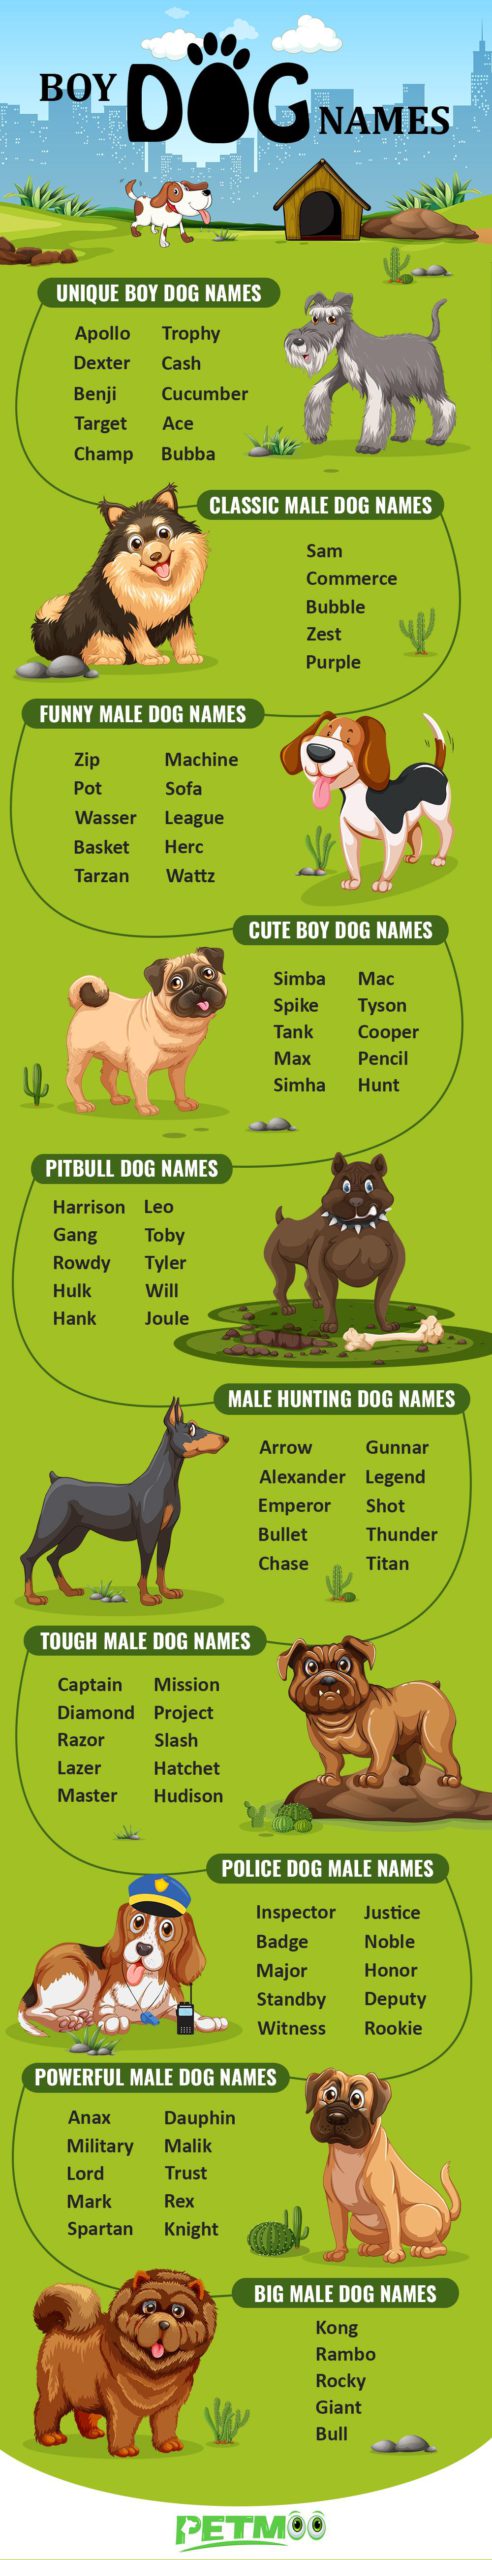 2020-best-boy-dog-names-backed-with-complete-meanings-petmoo